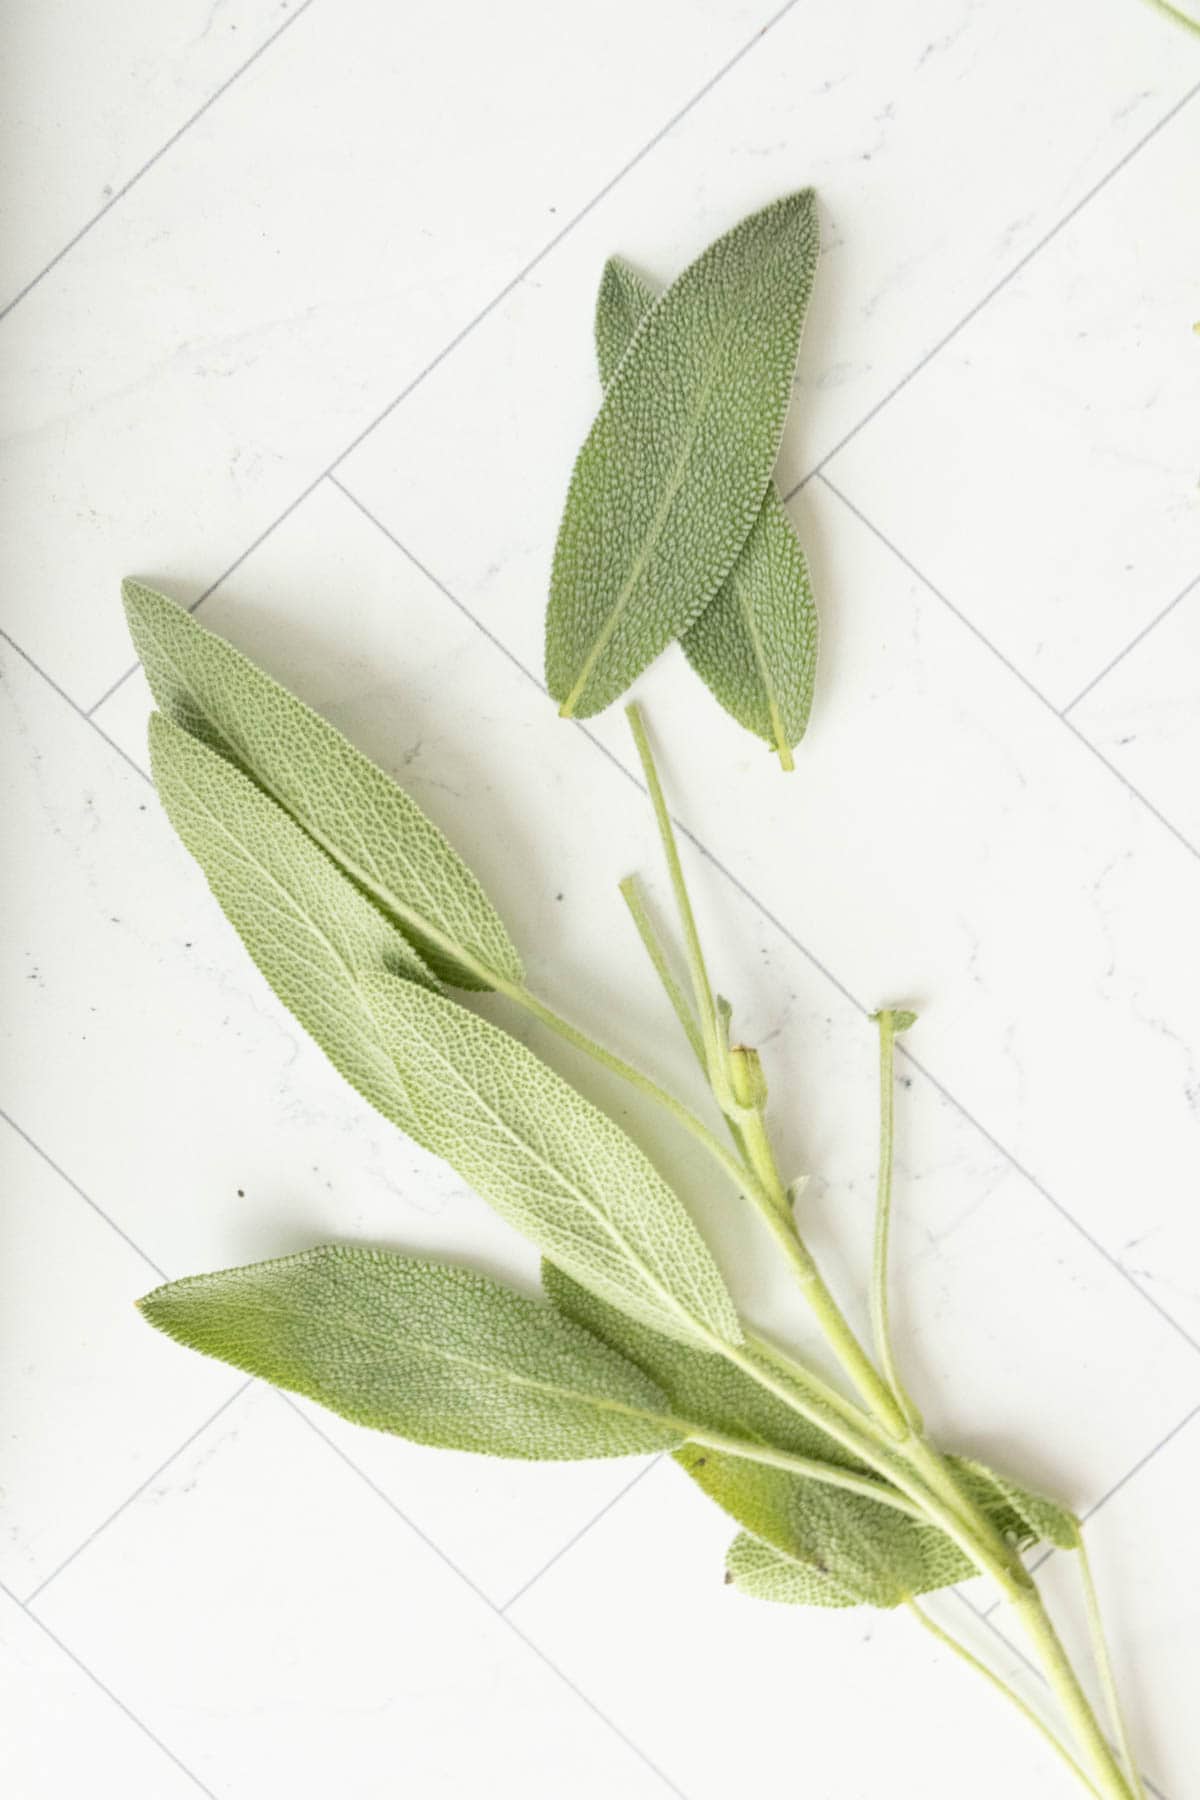 Sage leaves on a white marble countertop.